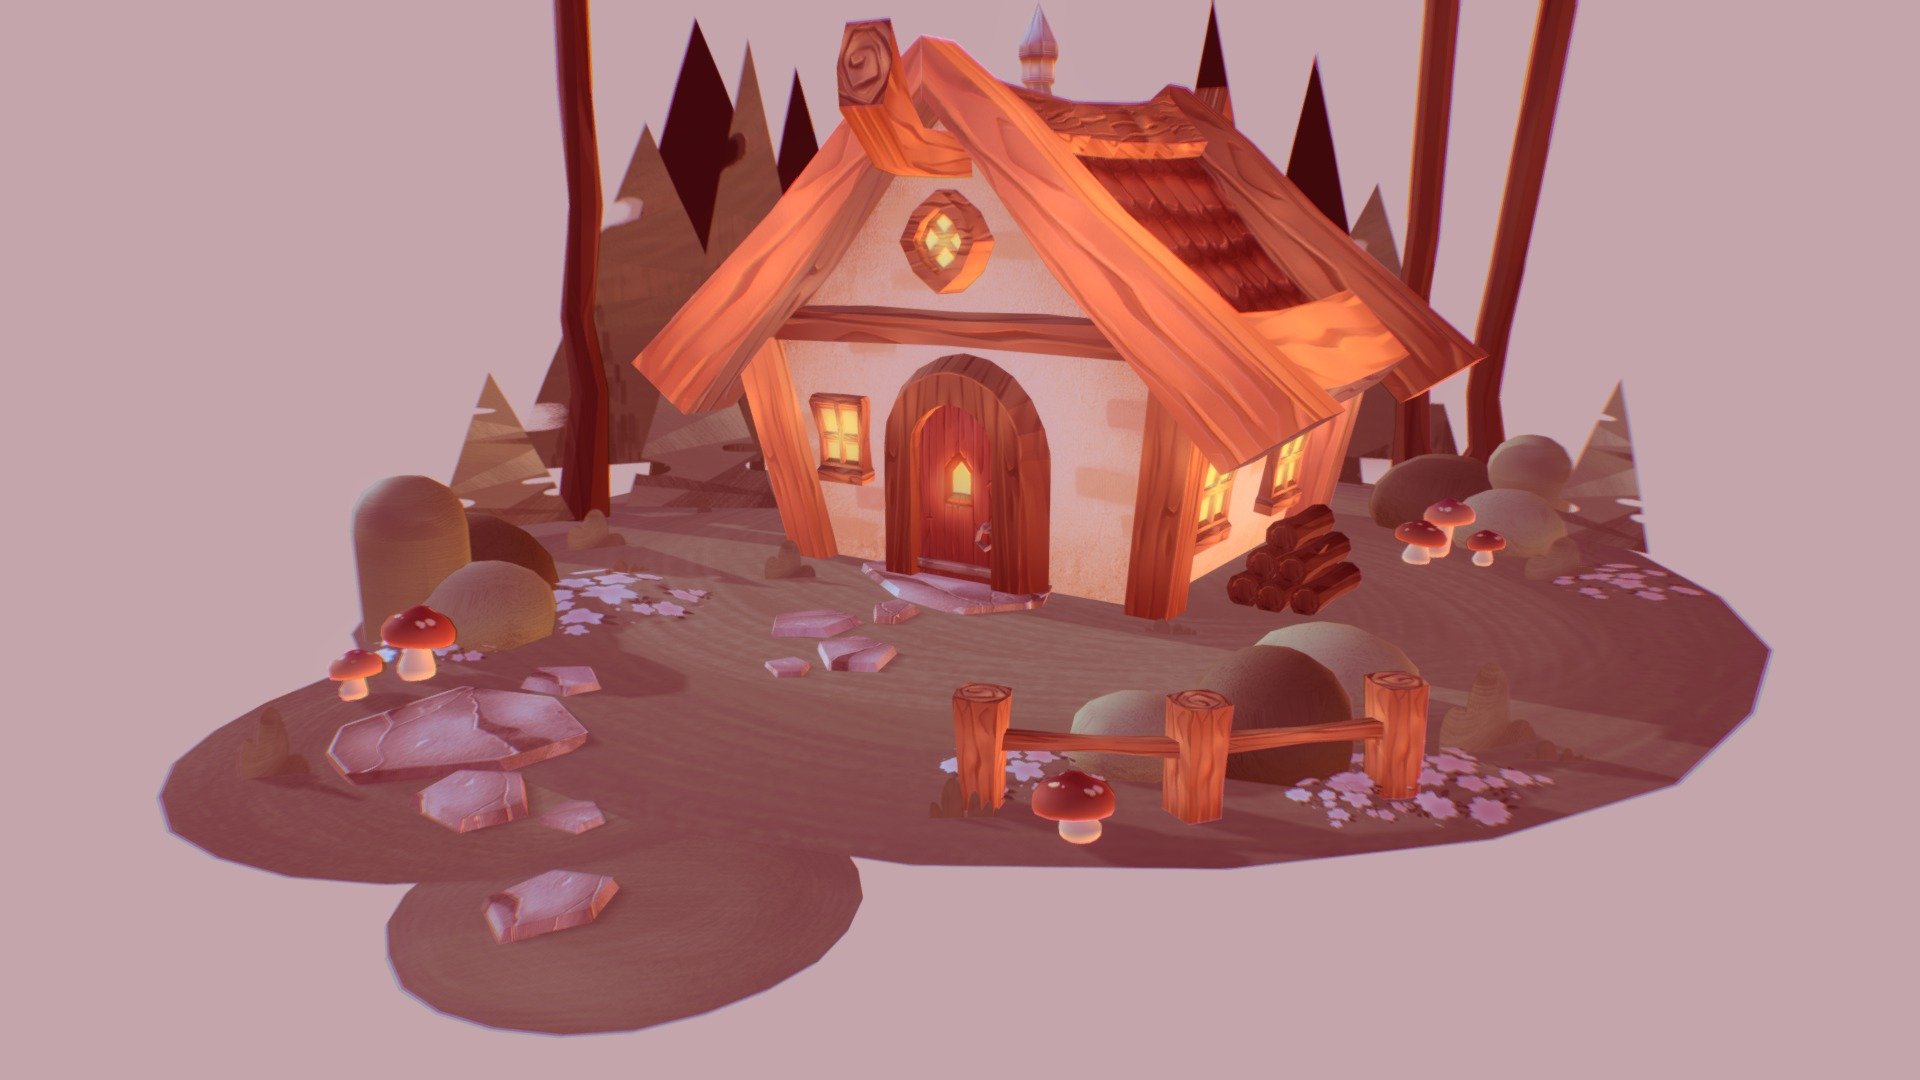 made for my diorama uni project, first time fully handpainting a model and using bump/glow maps :) 
a little overambitious but i still like the outcome ! 

hope you like it  (─‿‿─)♡

https://twitter.com/myochii - cozy cabin - 3D model by myochii 3d model